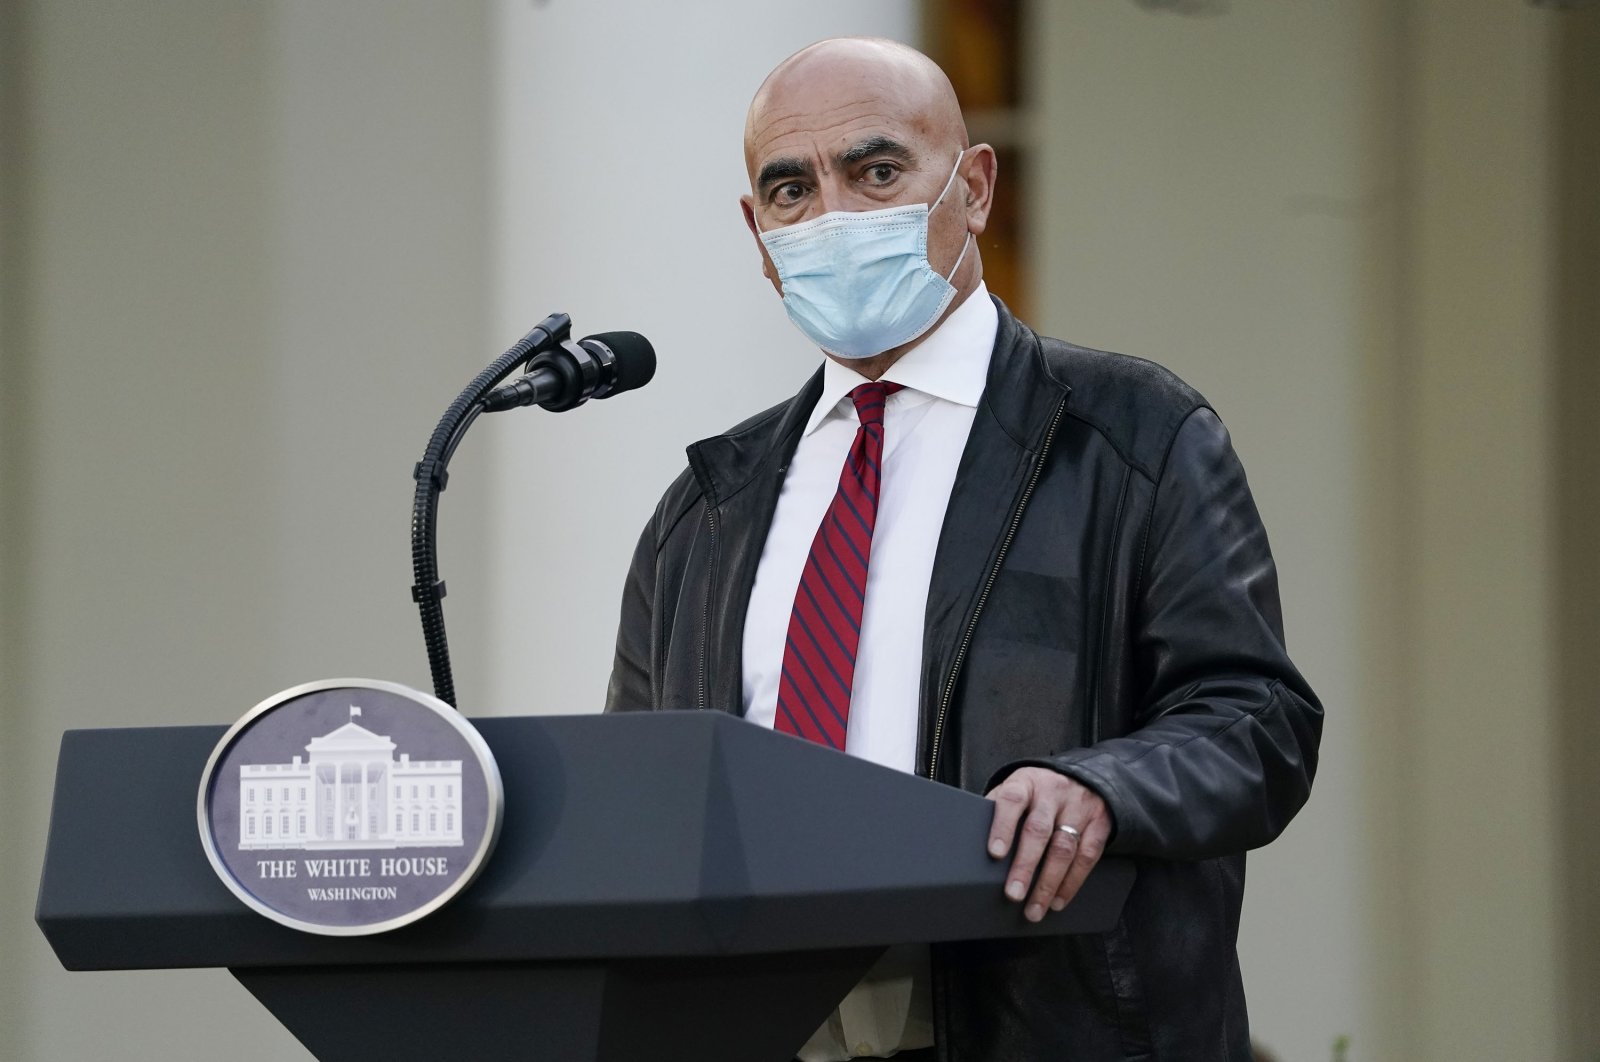 Dr. Moncef Slaoui, chief adviser to Operation Warp Speed, speaks in the Rose Garden of the White House, in Washington, D.C. on Nov. 13, 2020. (AP Photo)